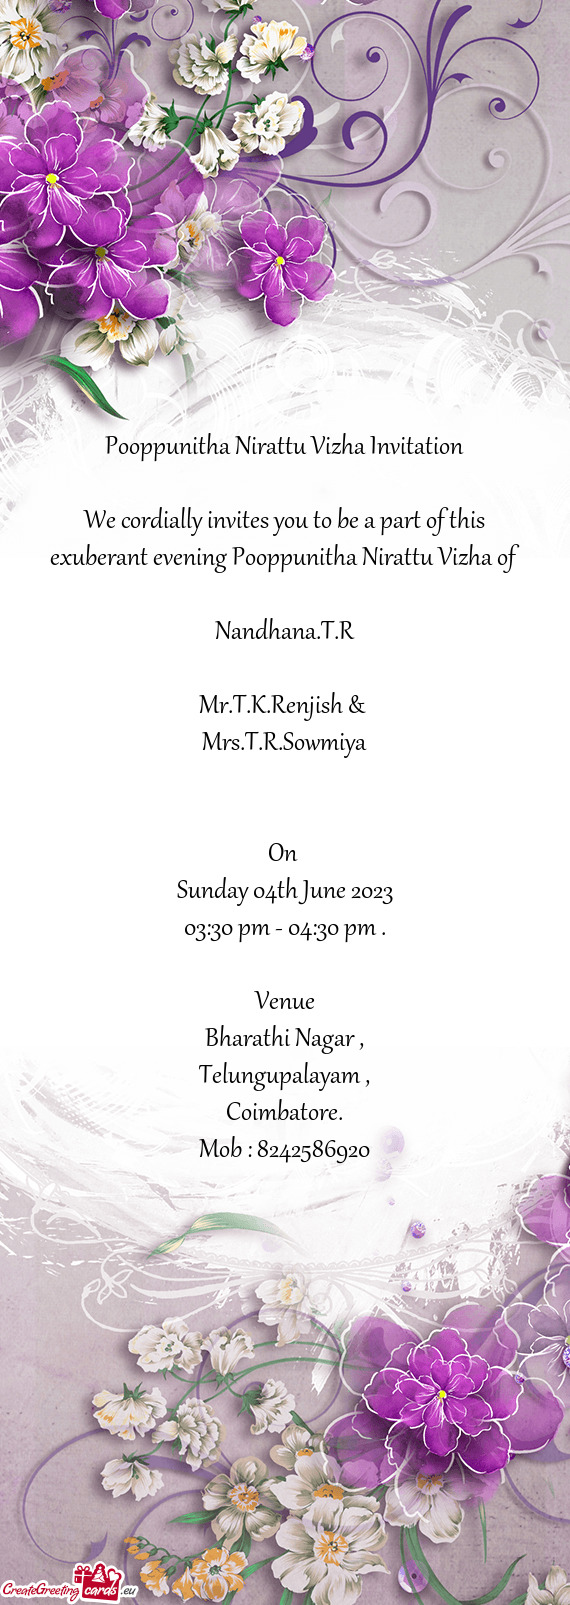 We cordially invites you to be a part of this exuberant evening Pooppunitha Nirattu Vizha of